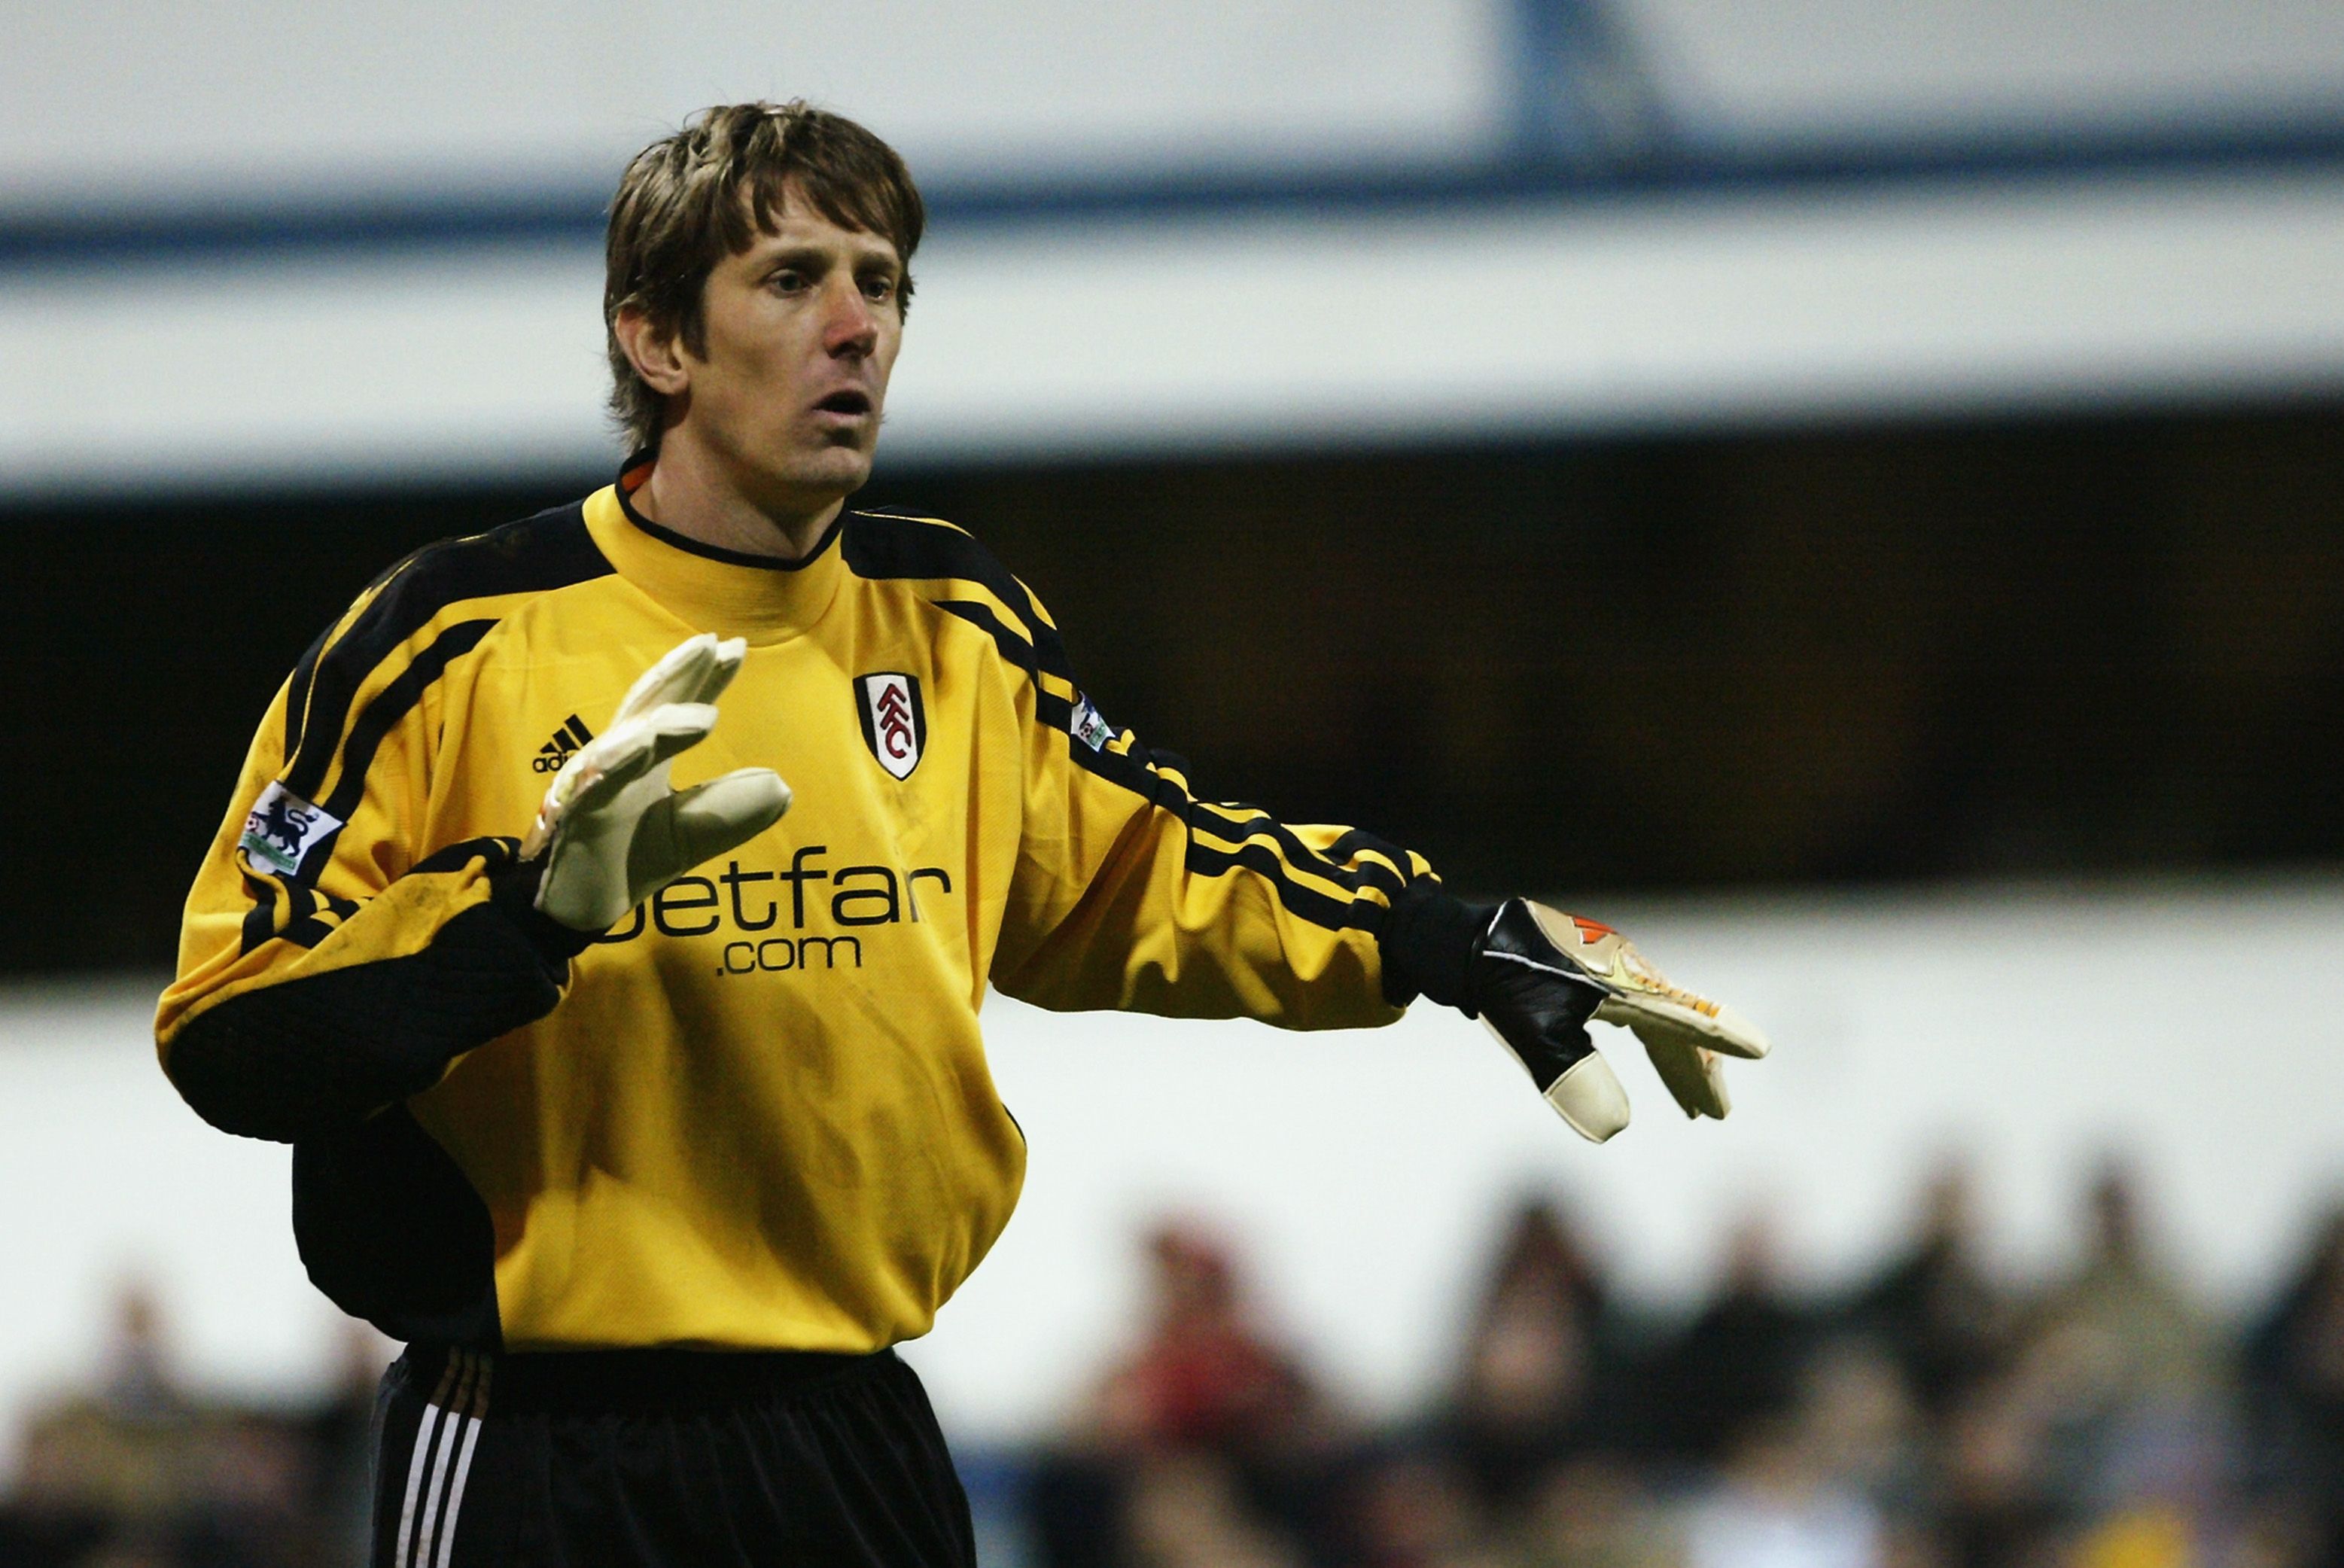 LONDON - DECEMBER 7: Edwin Van Der Sar of Fulham in action during the FA Barclaycard Premiership match between Fulham and Leeds United held on December 7, 2002 at Loftus Road Stadium, in London. Fulham won the match 1-0. (Photo by Mark Thompson/Getty Images)